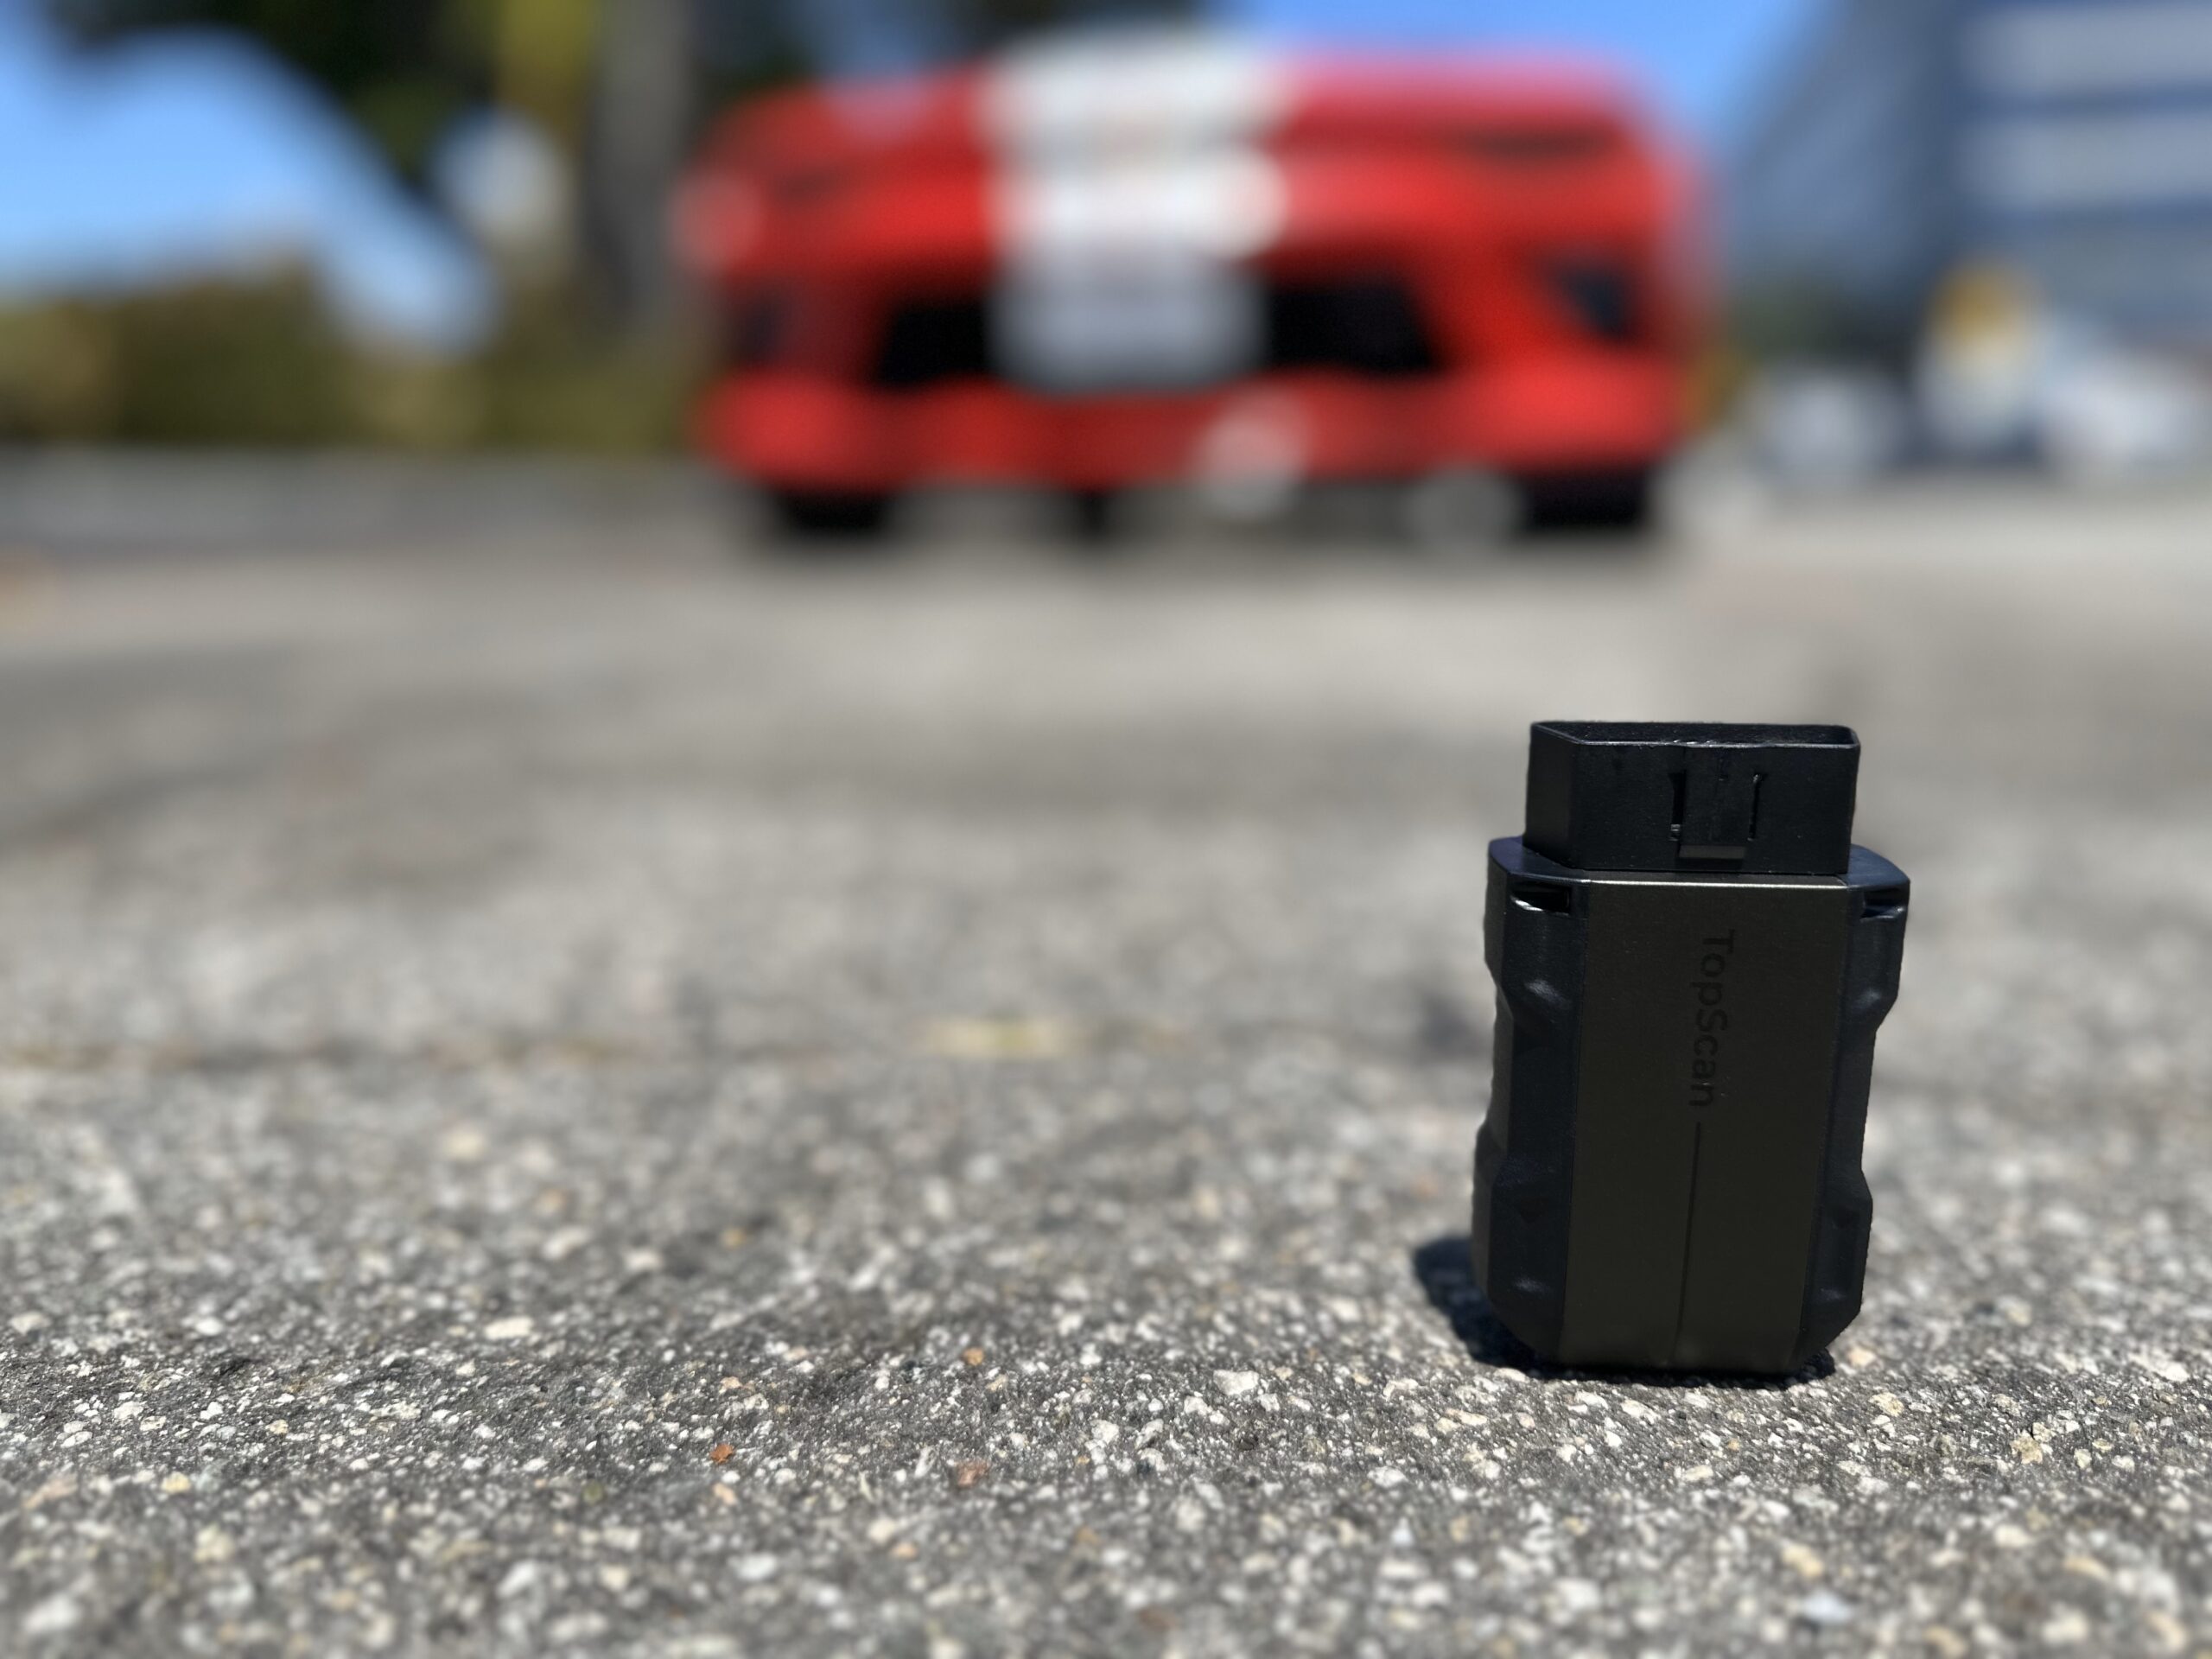 Take Full Control of Your Car's Health with TopDon's TopScan OBDII Reader